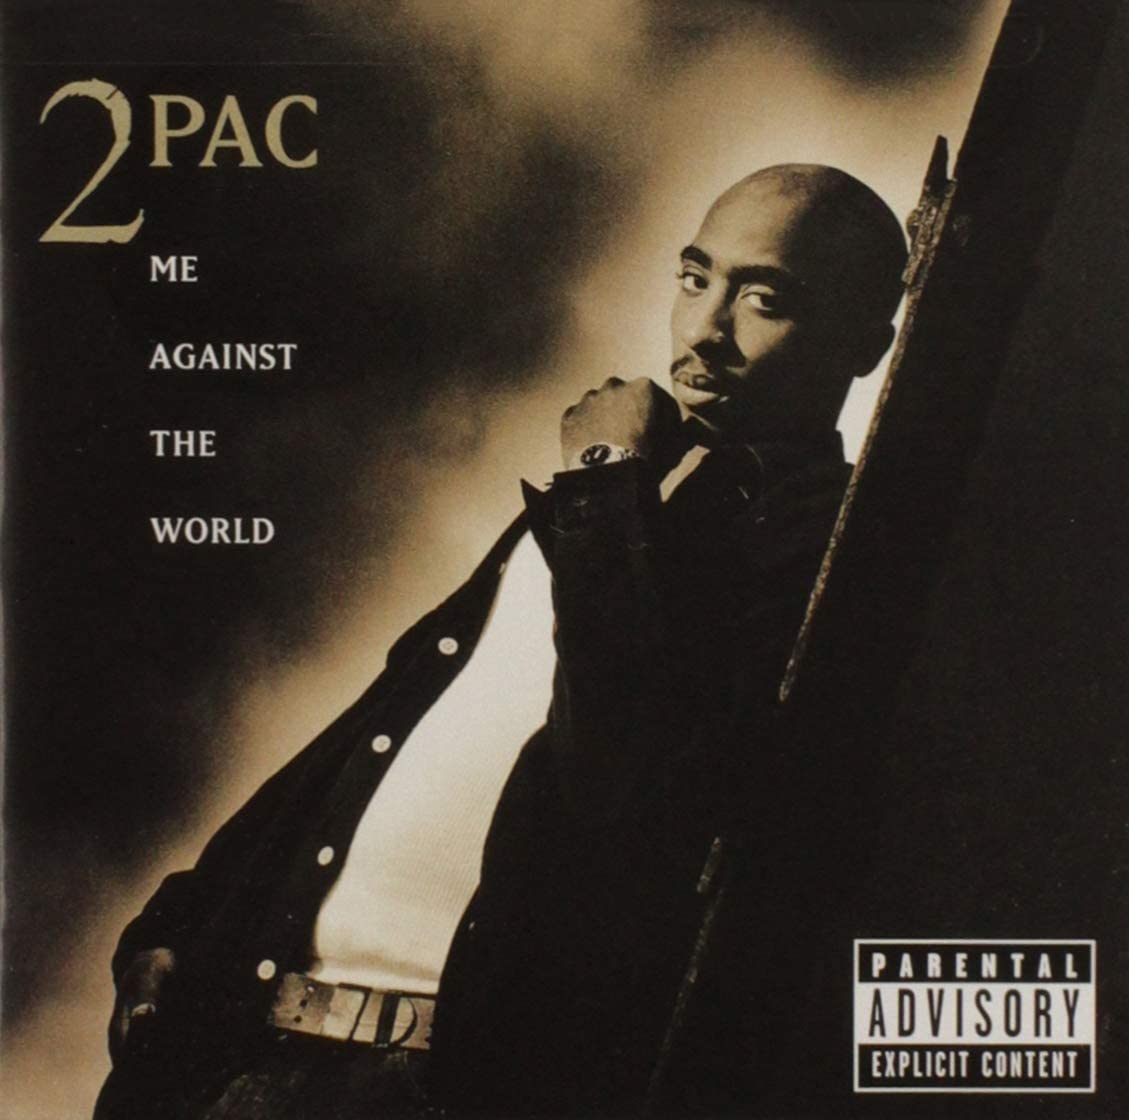 Me Against The World by 2Pac